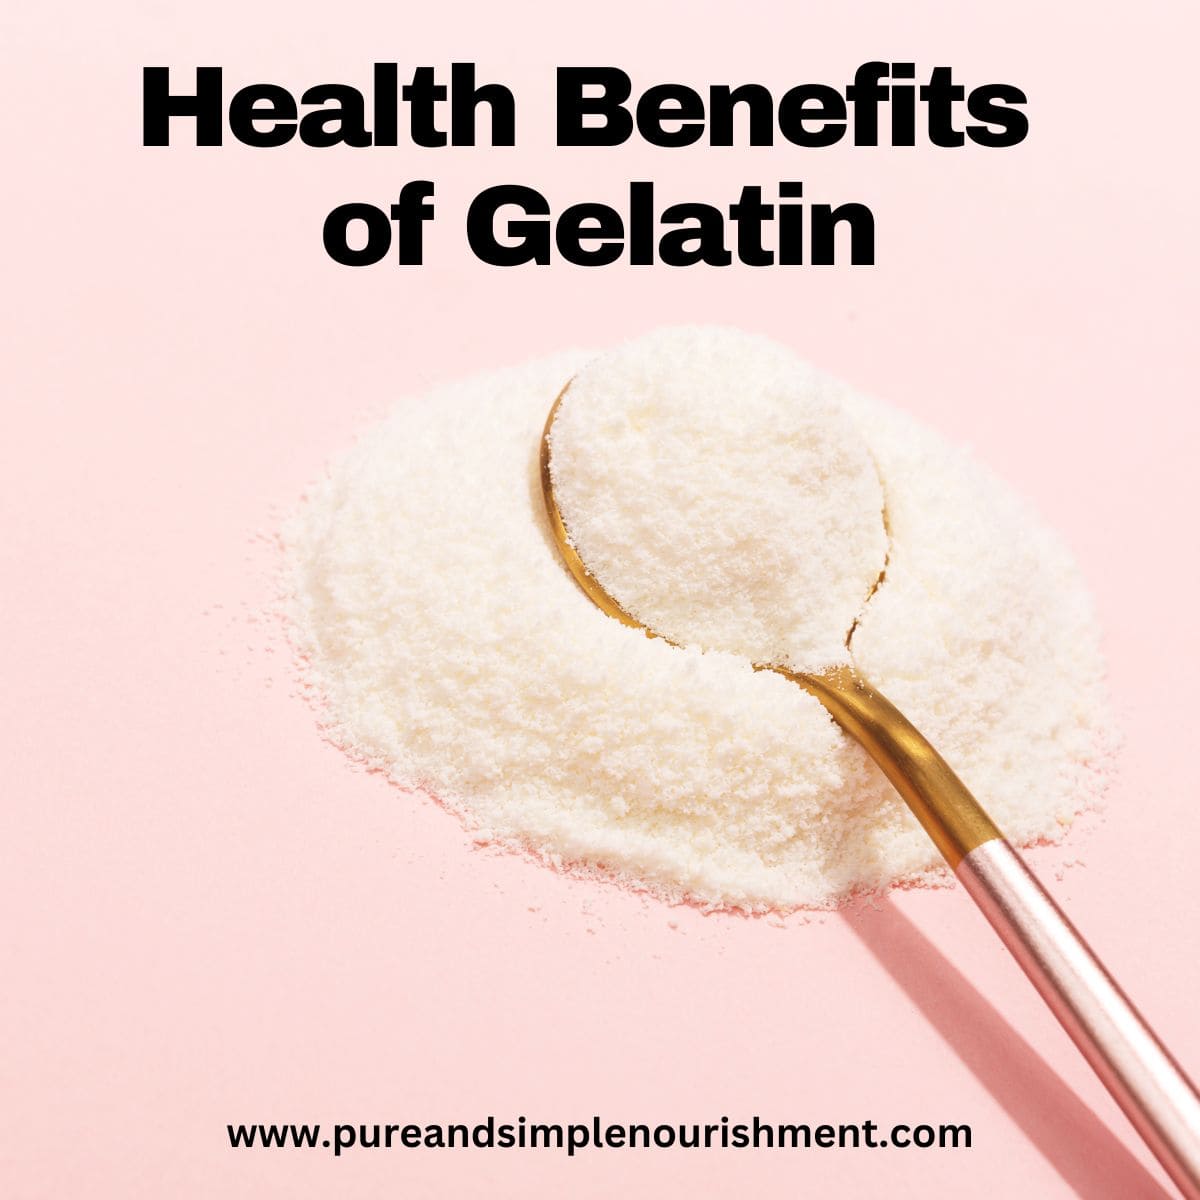 A spoon with powdered gelatin in it and the title Health Benefits of Gelatin over it.